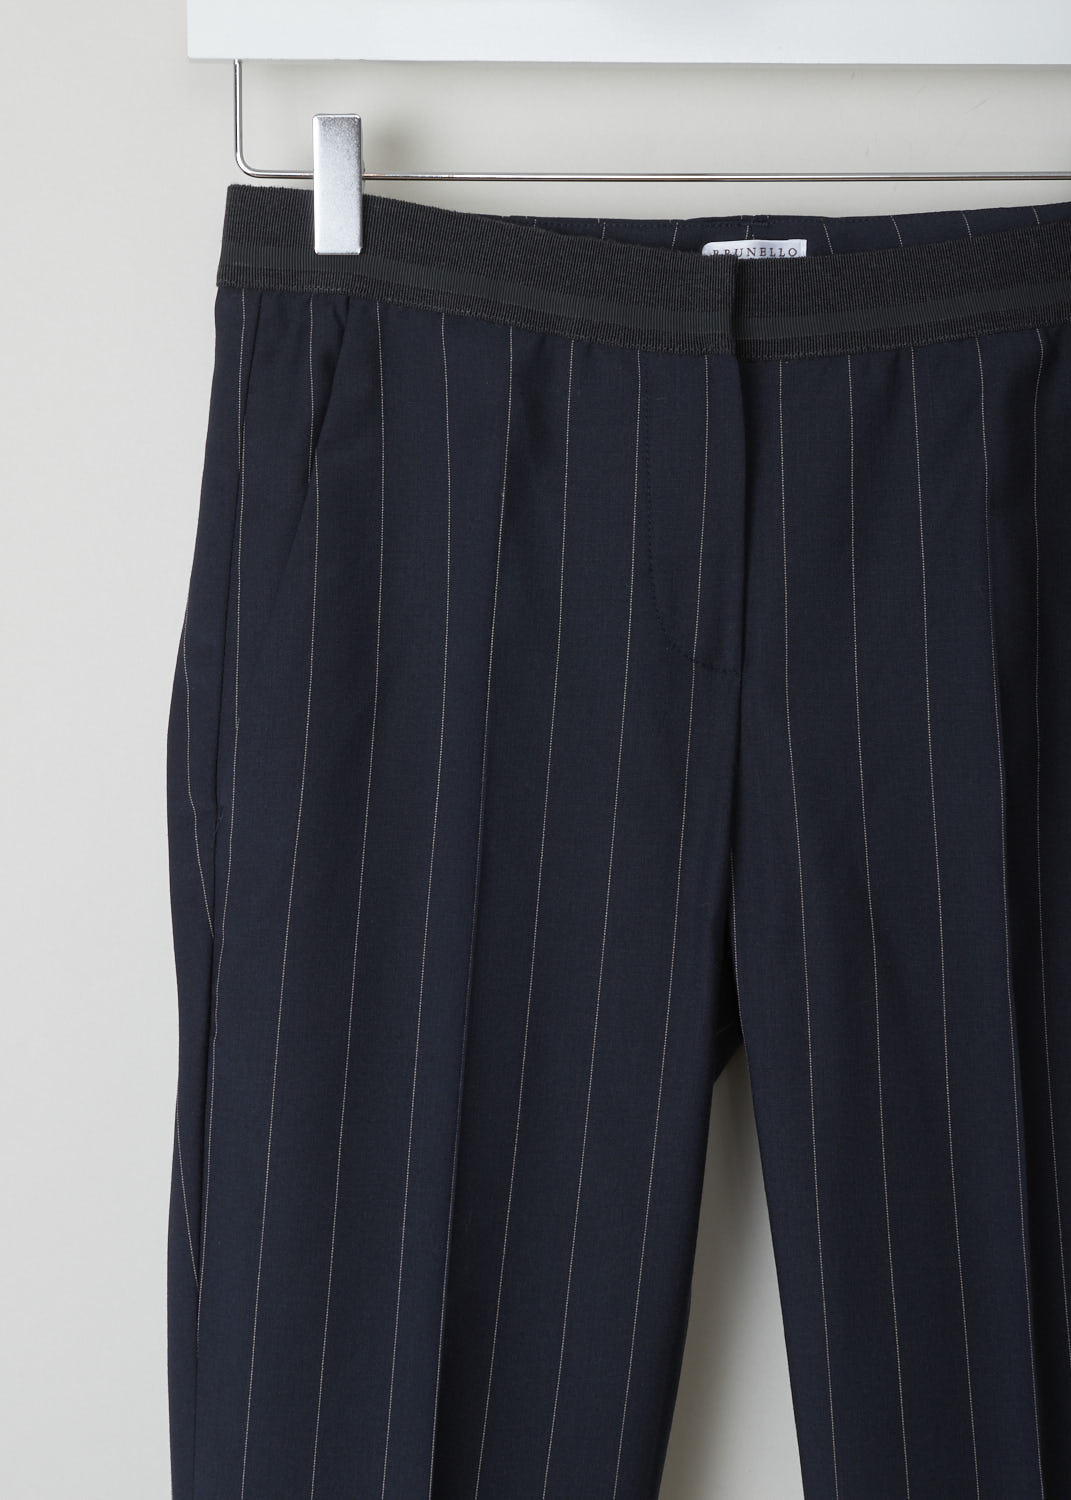 BRUNELLO CUCINELLI, NAVY BLUE TROUSERS WITH PINSTRIPE, M0H35P1500_C6009, Blue, Detail, These navy blue pinstripe trousers are made of a wool blend. Featuring a partly elasticated waistline, forward slanted pockets in the front, and two buttoned welt pockets in the back. Along the length of the pant leg, centre creases can be found. These trousers have a folded hem.
